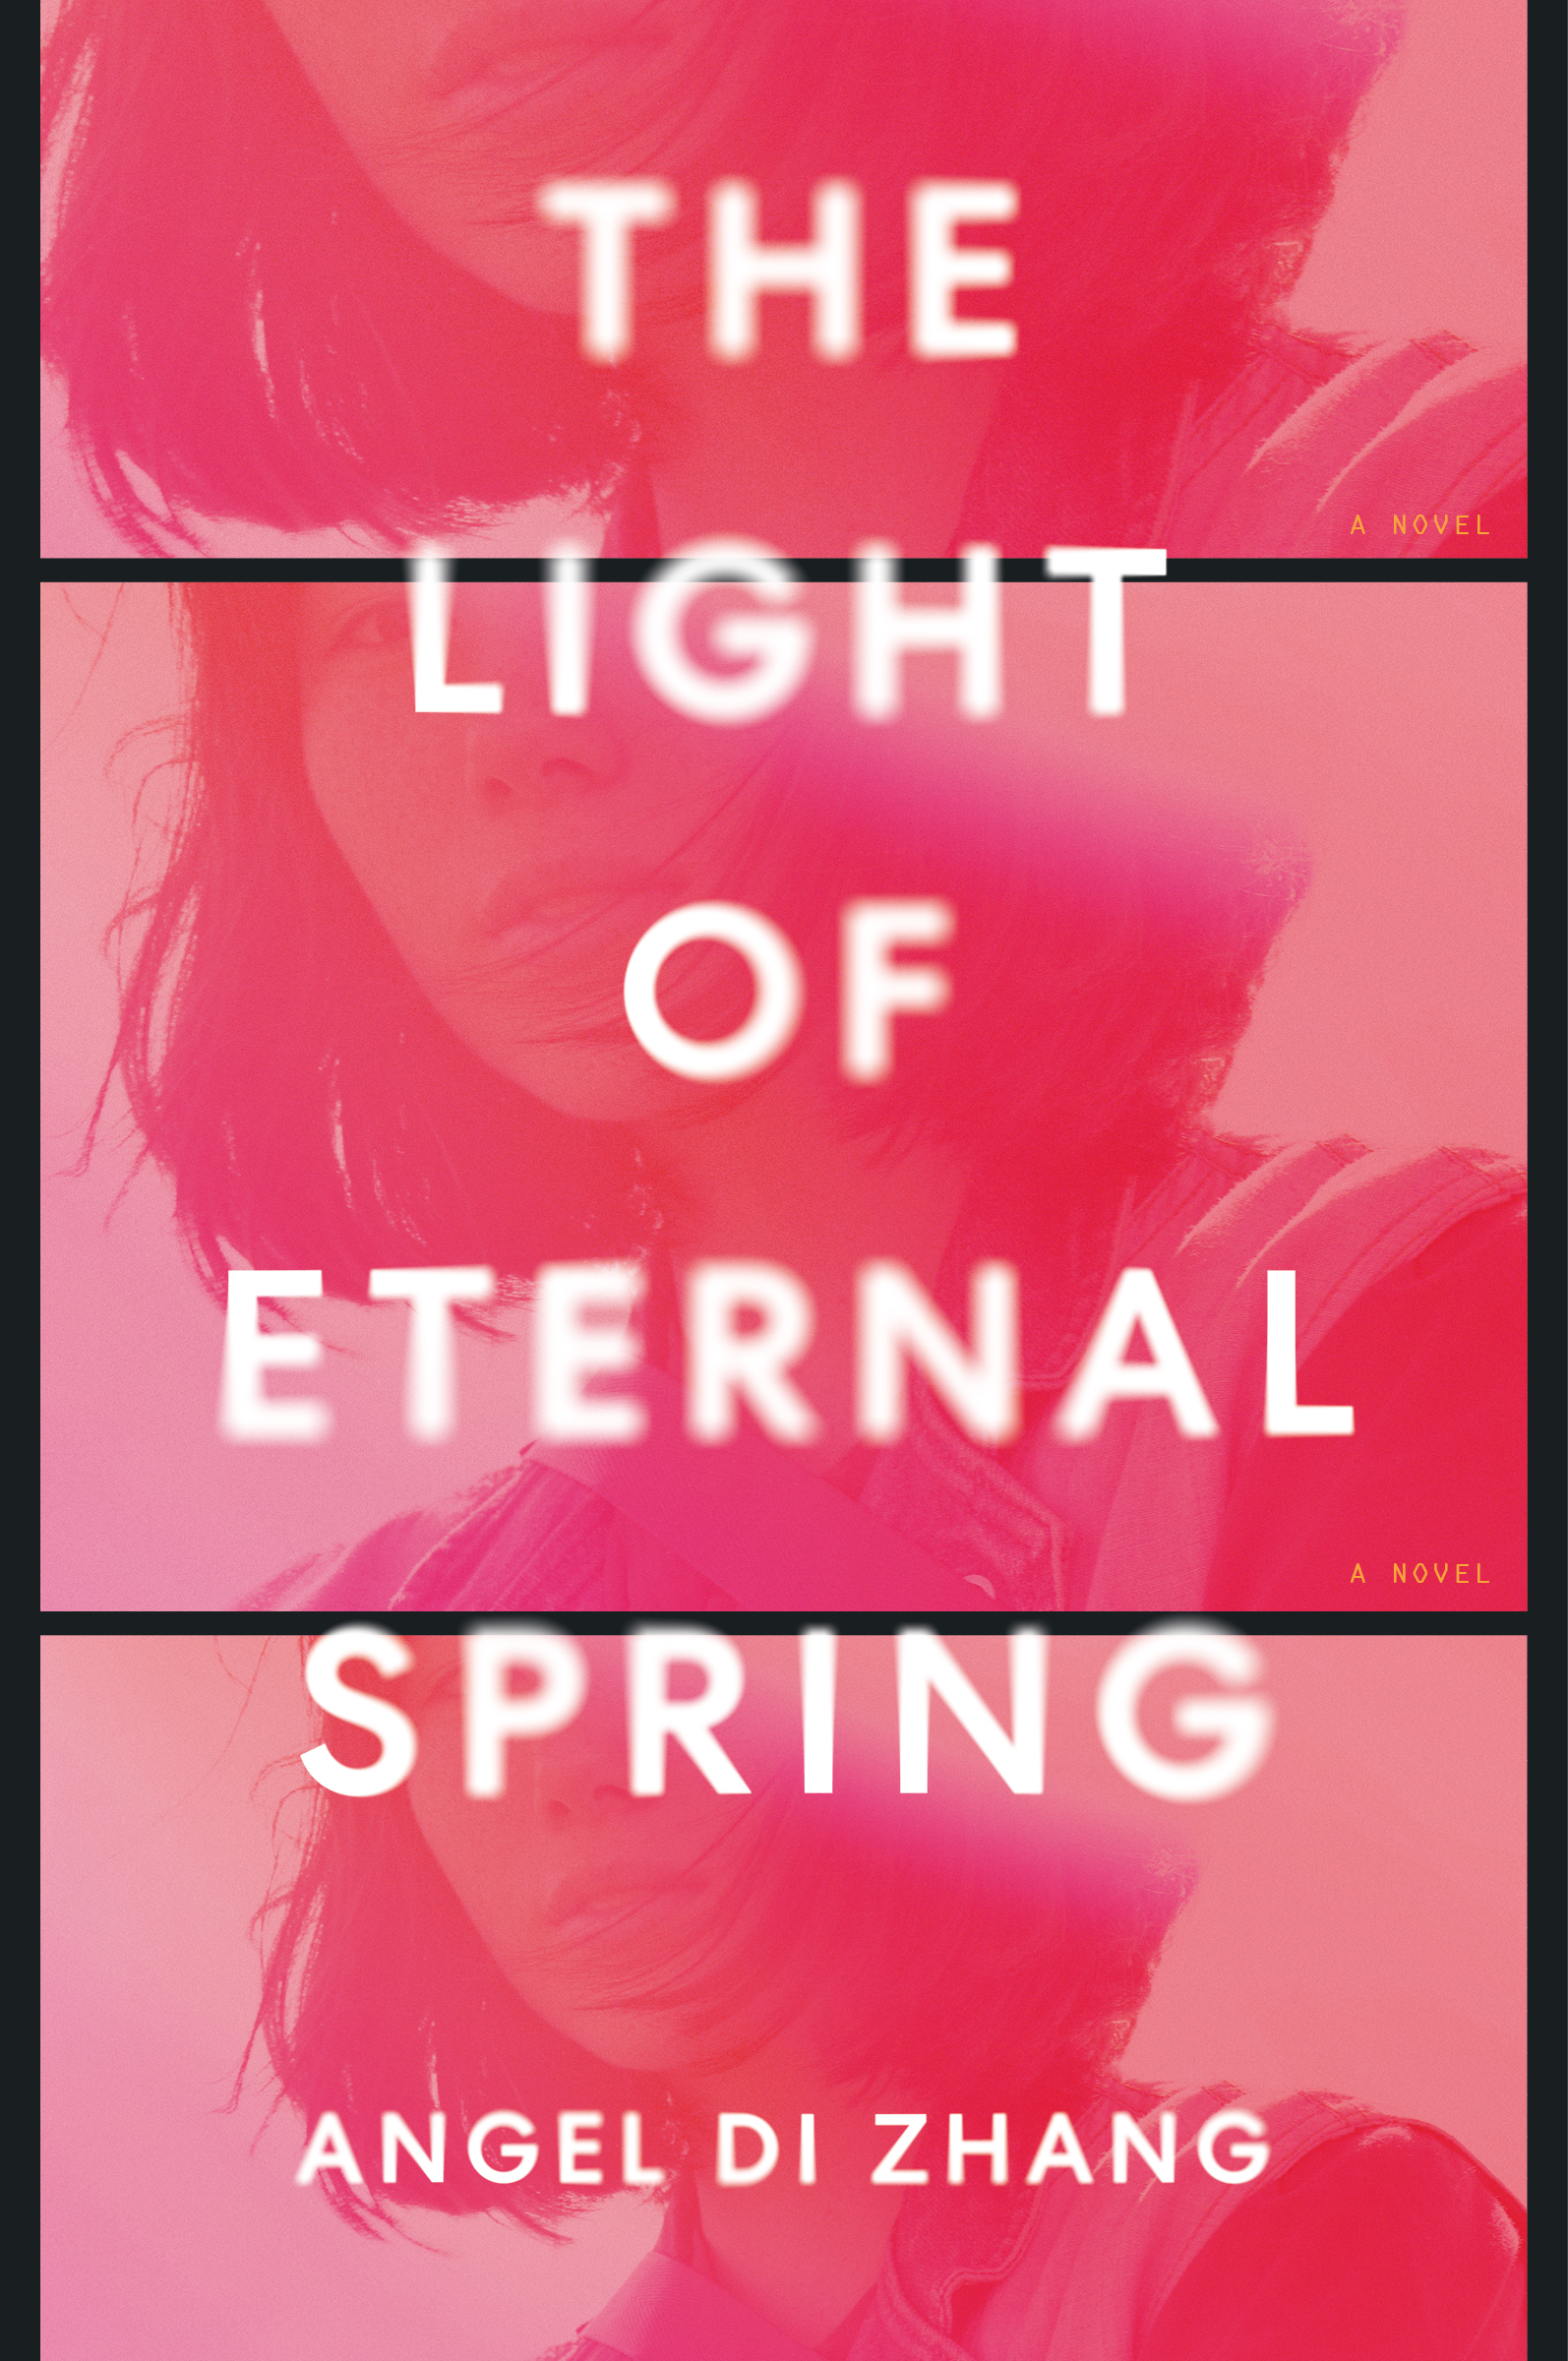 The book cover of The Light of Eternal Spring by Angel Di Zhang